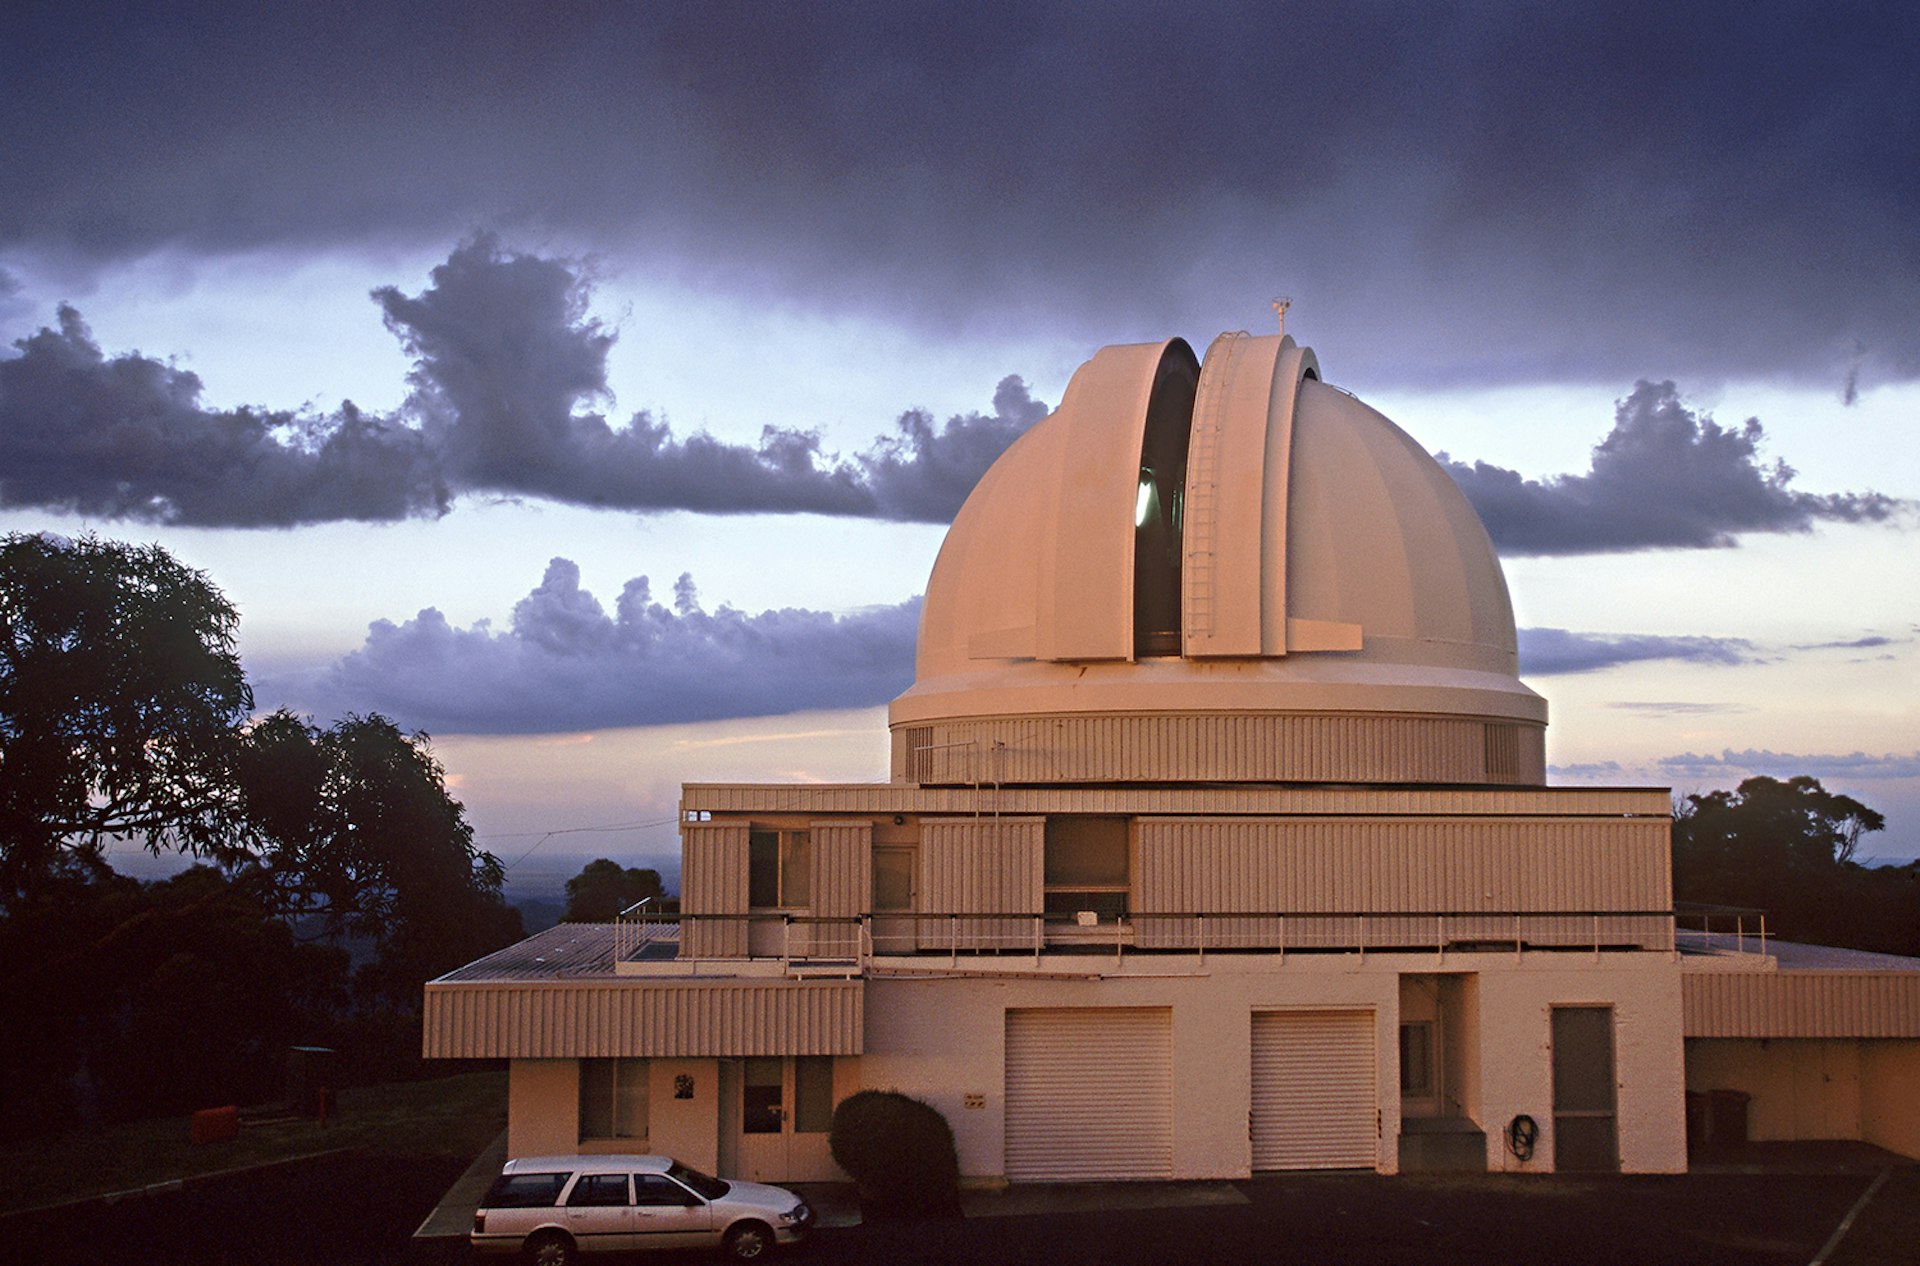 Sunset at Siding Spring Observatory, home to Australia's heftiest optical telescope, and a favourite dark-sky destination in NSW. Image by Grahame McConnell / Photolibrary / Getty Images